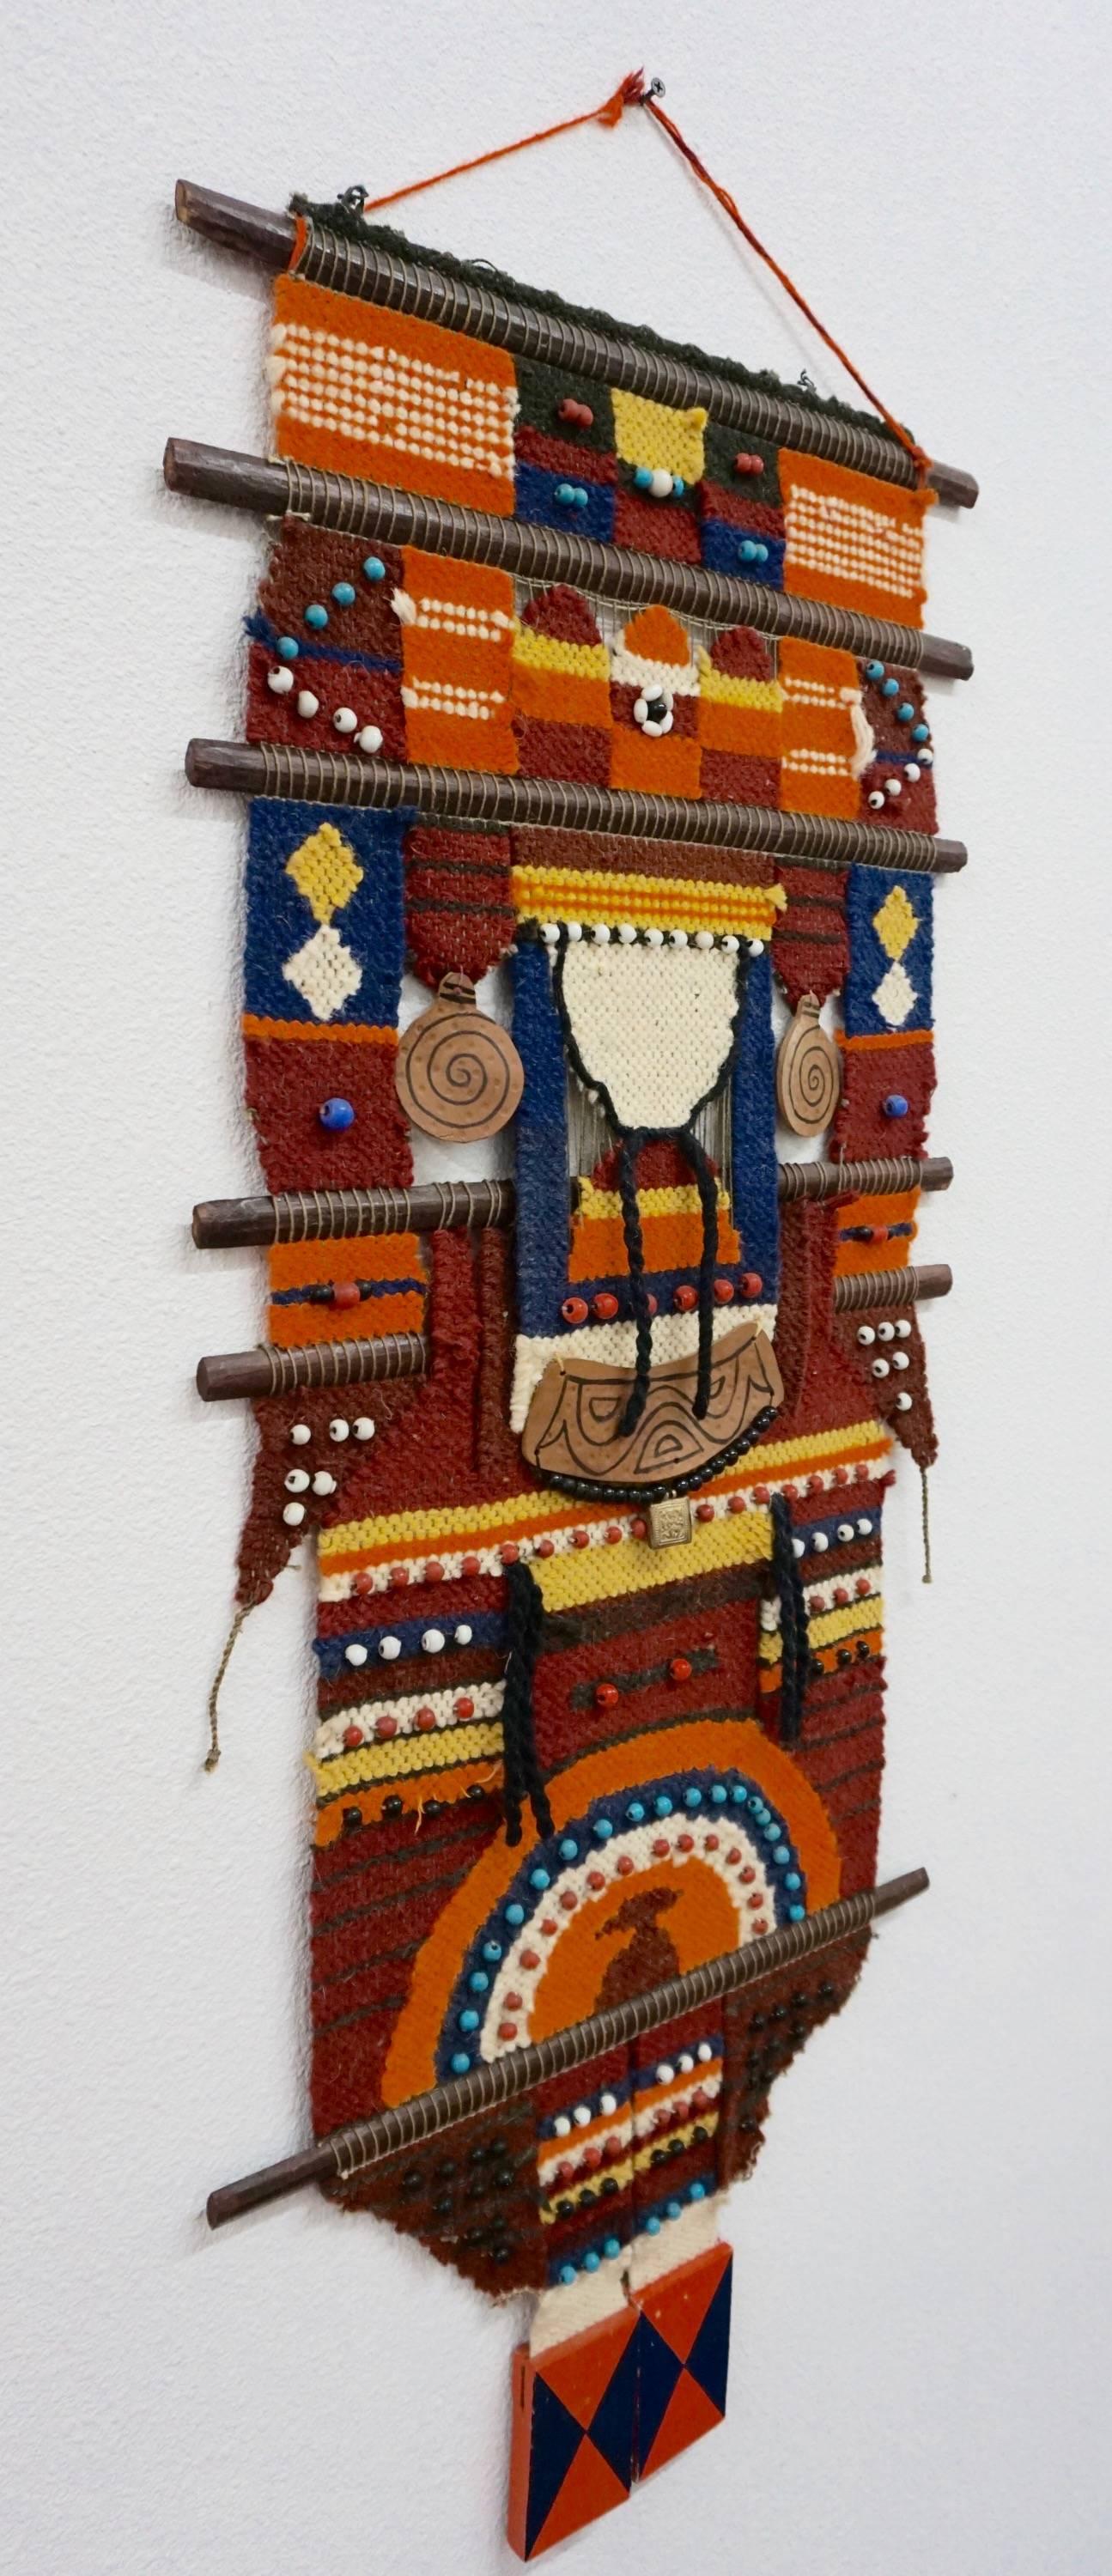 This fascinating flat weaved wall hanging has leather, shells and beads incorporated into the fabric and two painted wood blocks dangling from the bottom.